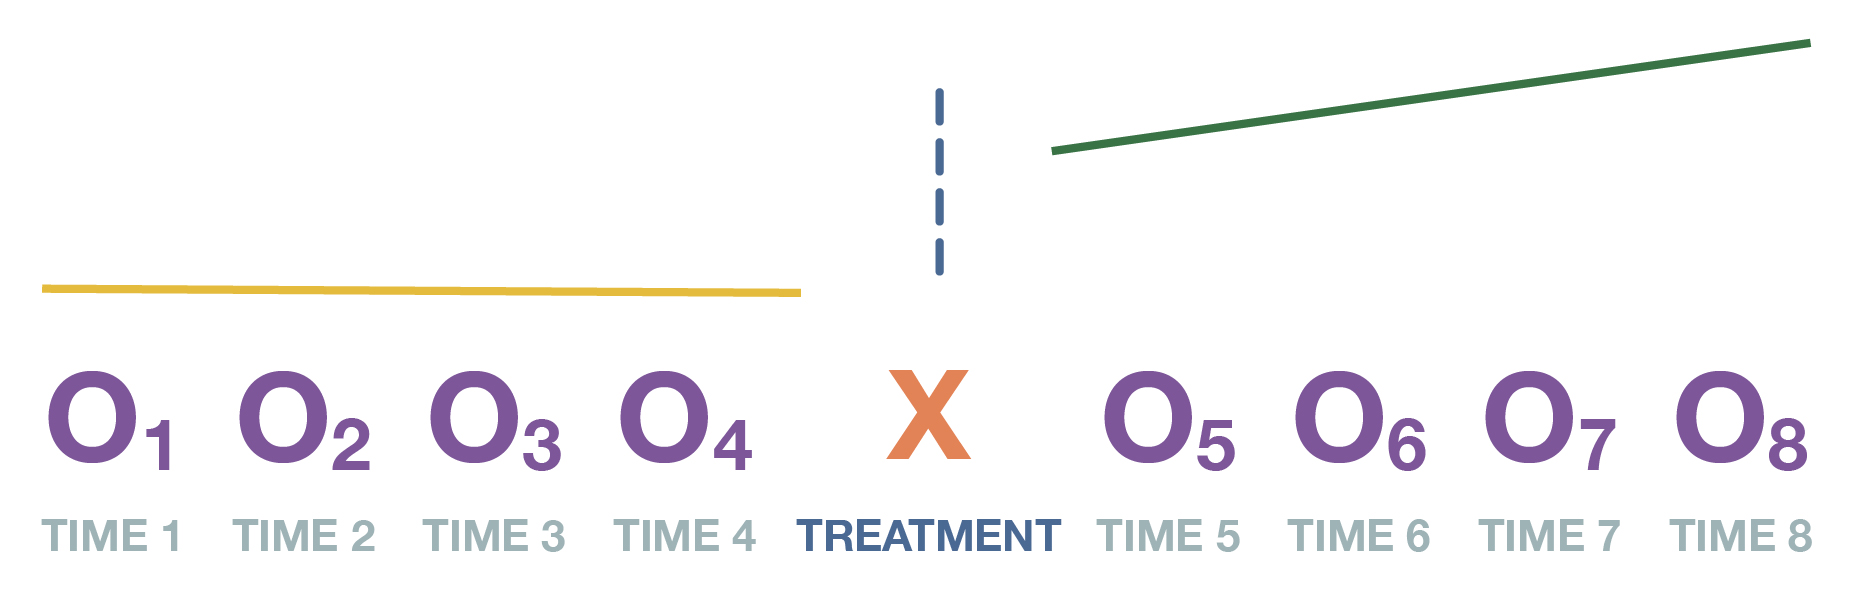 Diagram representing multiple observations with a treatment “X” occurring in the middle of these observations. After the treatment has occurred, the previously flat trendline slants upward.